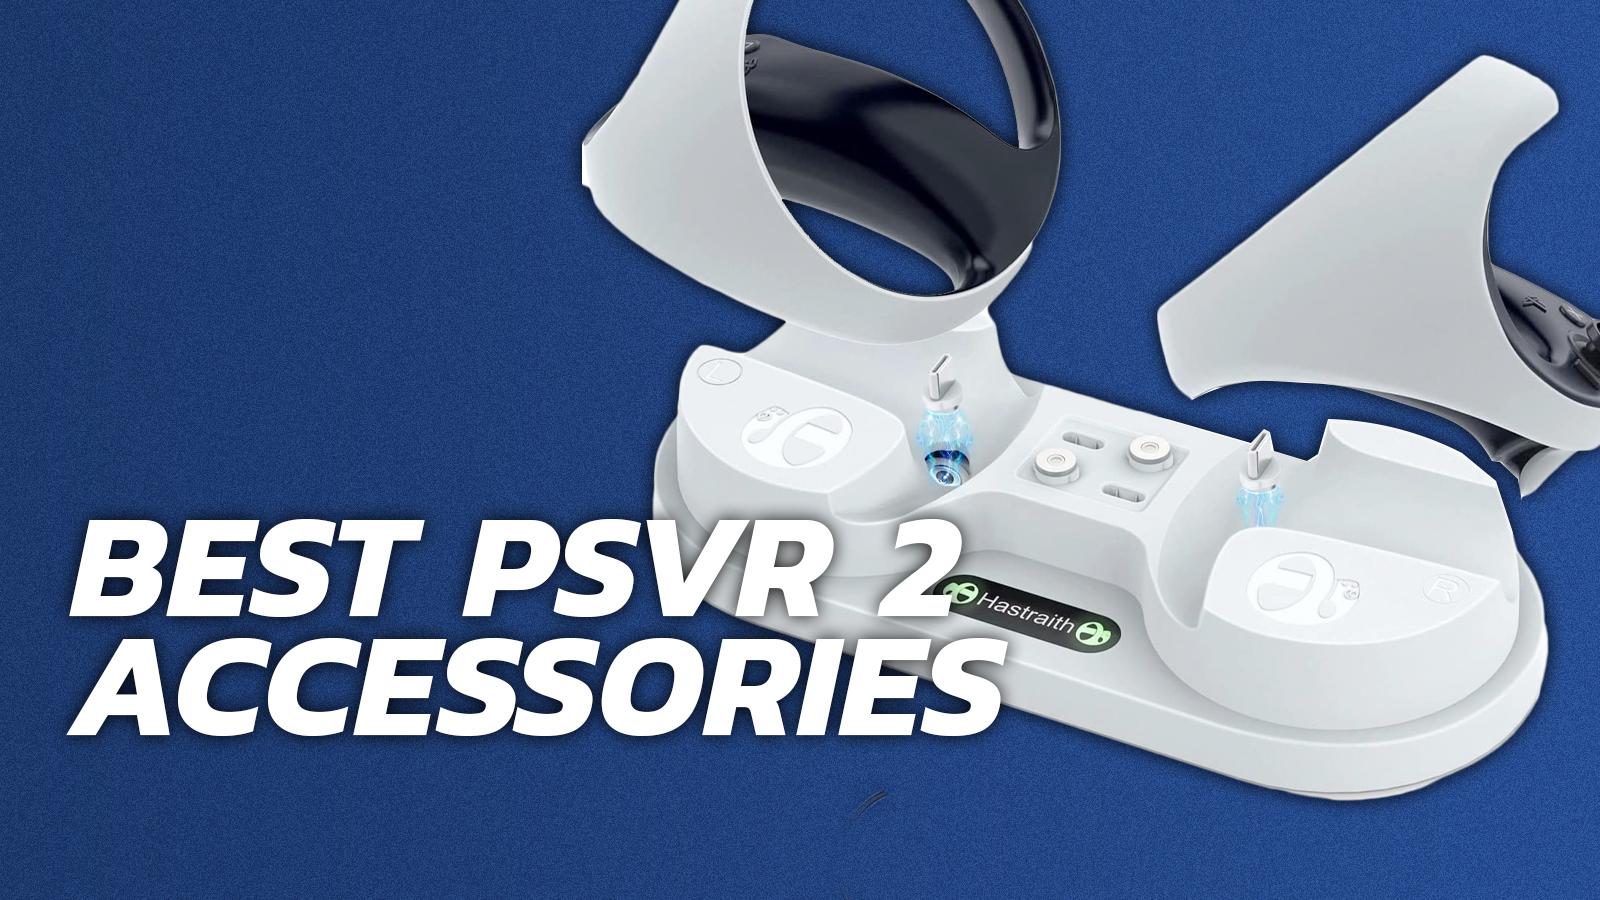 Crazy Game for Playstation & Related Accessories